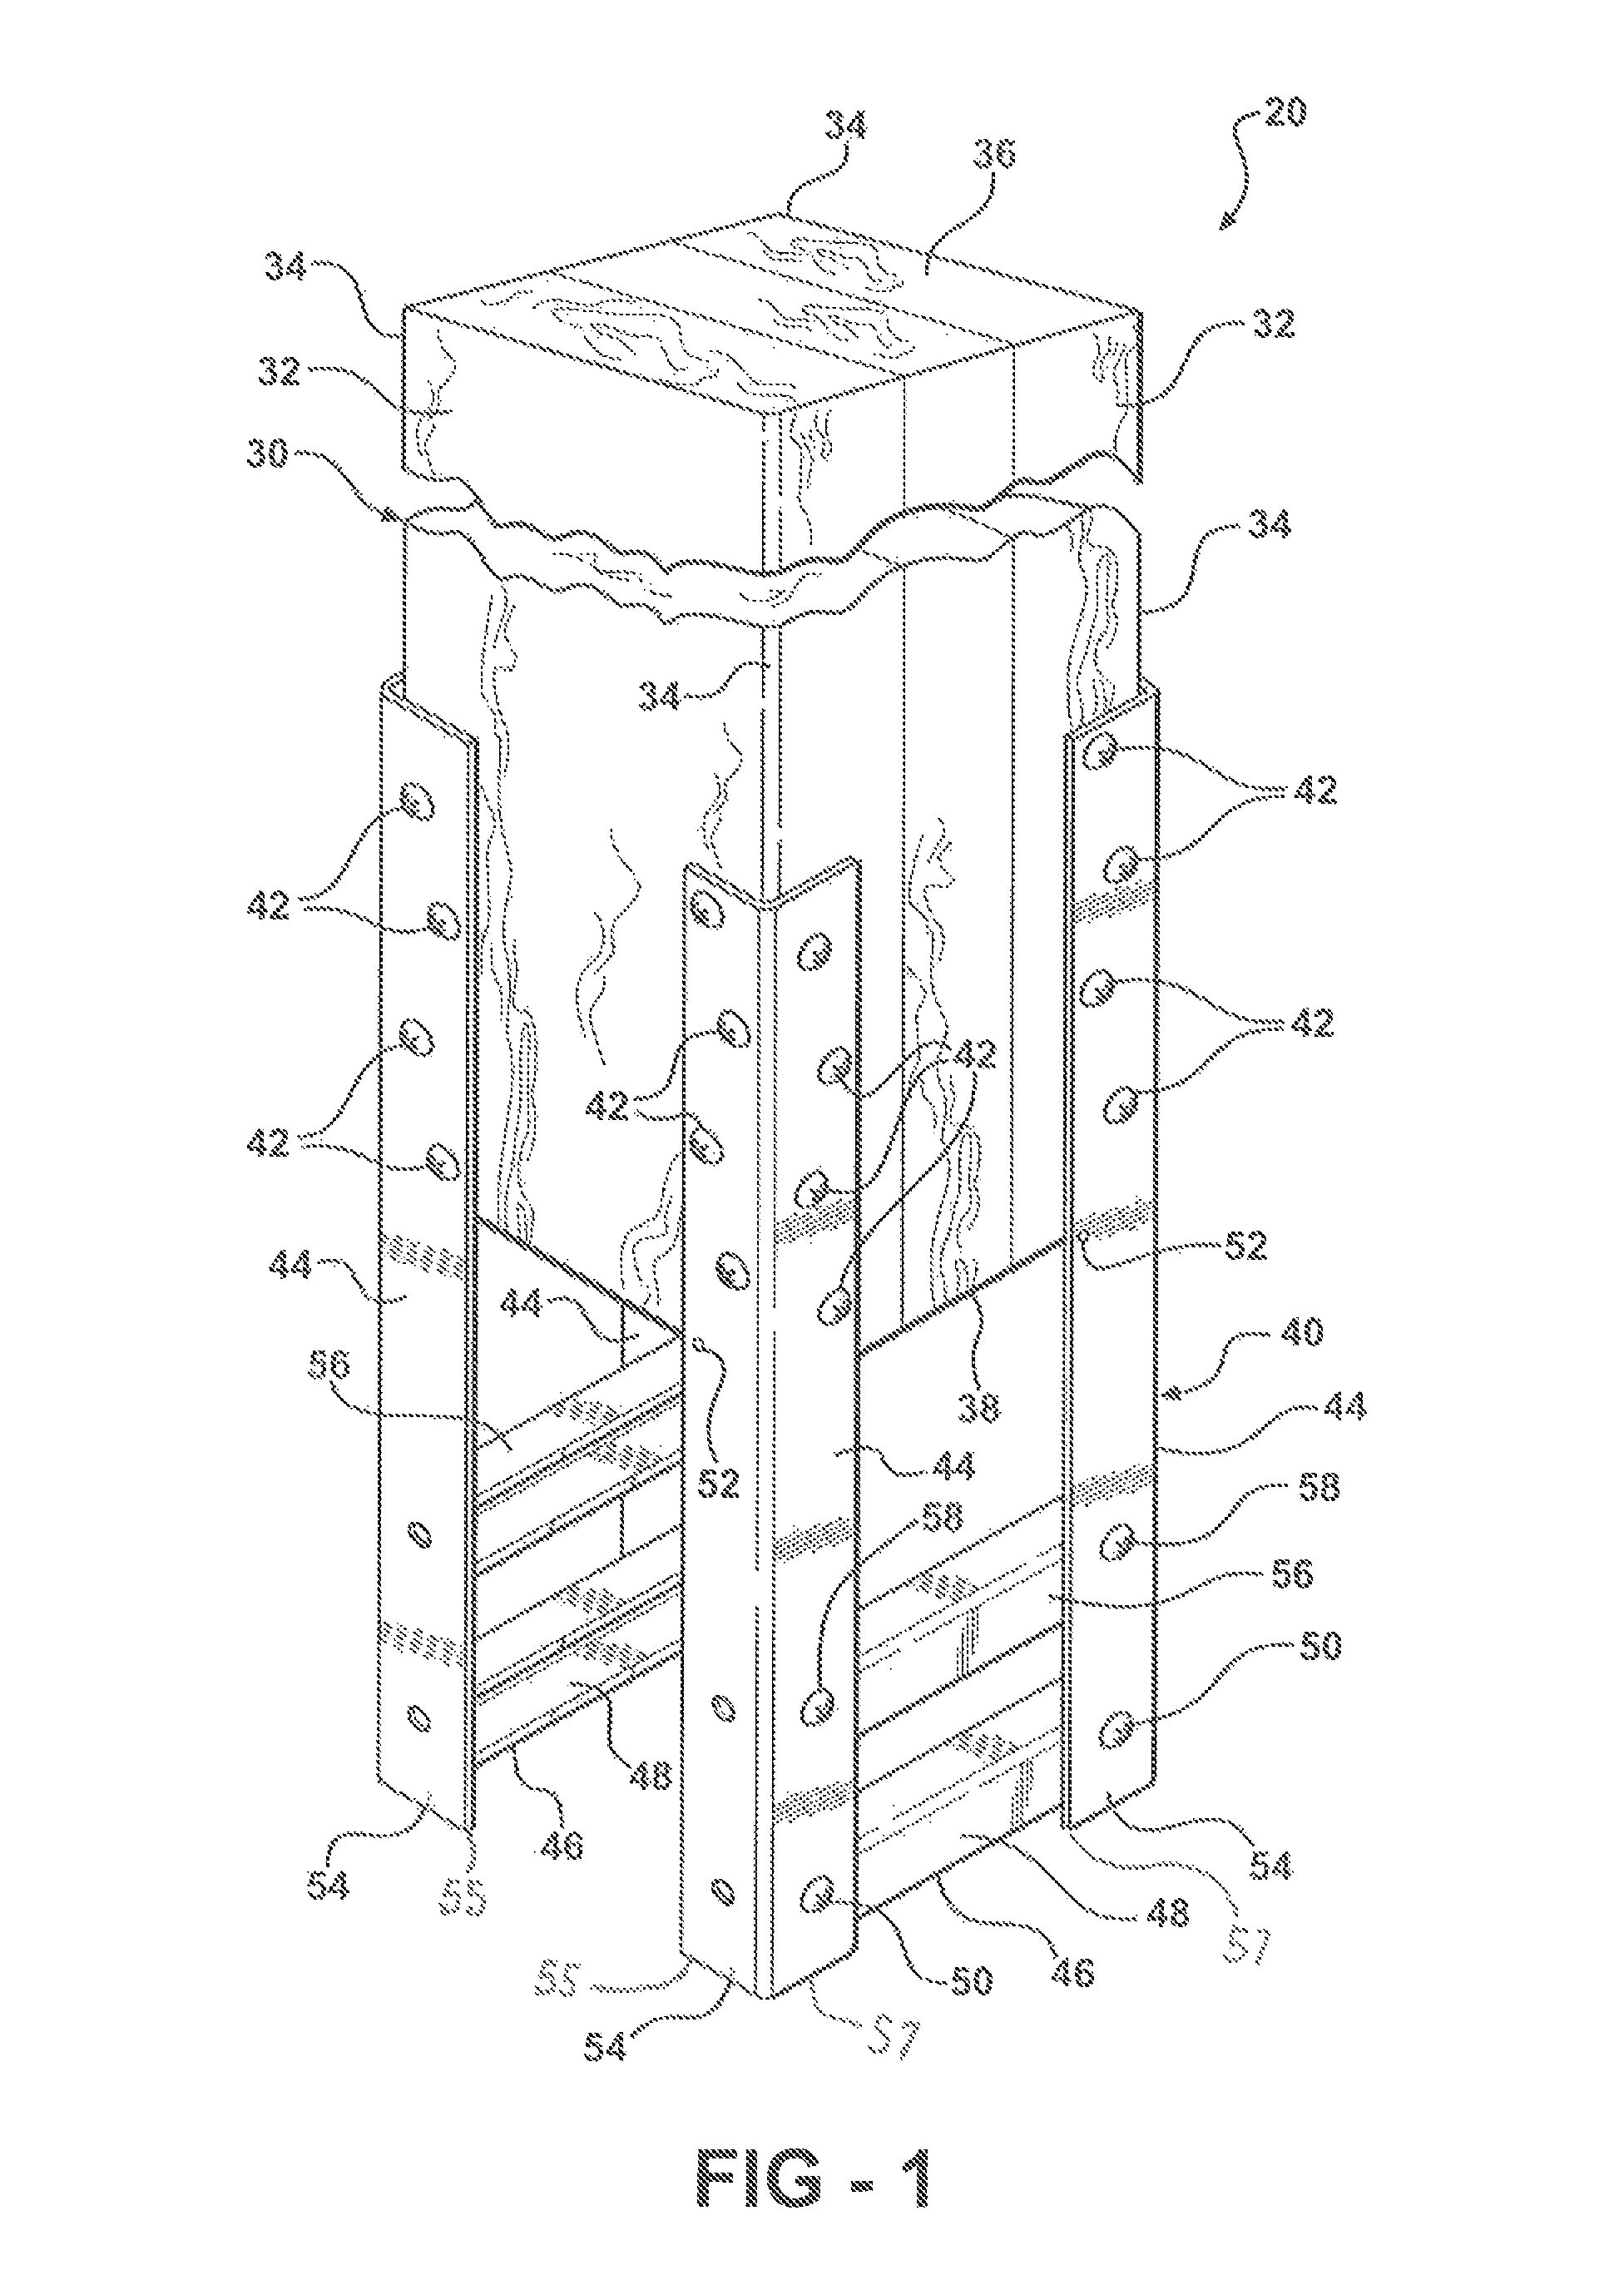 Structural column with footing stilt